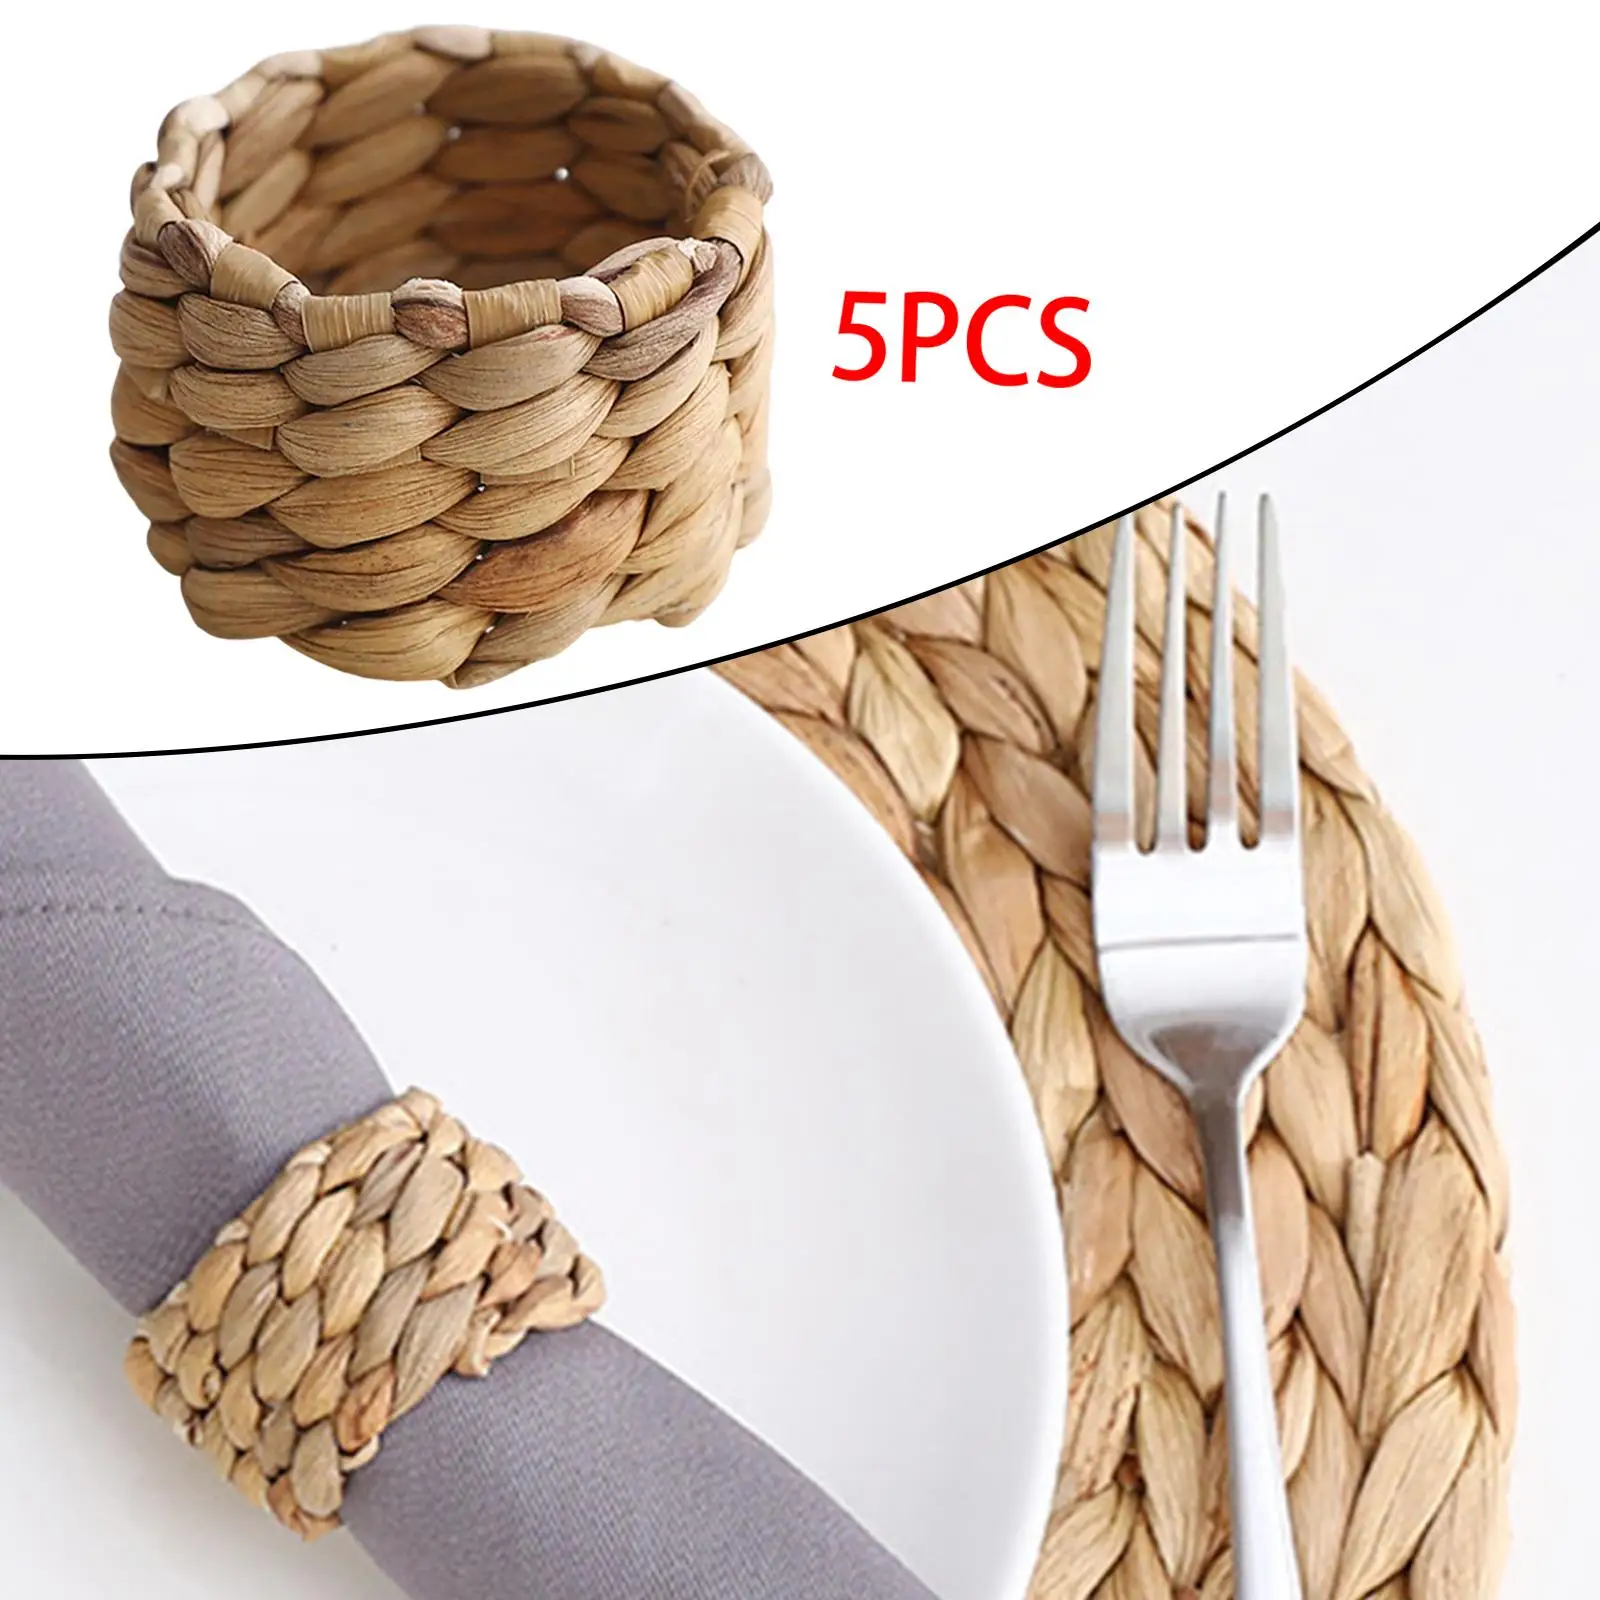 5 Pieces Napkin Ring Holders Decorative Woven Napkin Buckle Holder for Candlelight Dinner Family Special Events Gatherings Decor